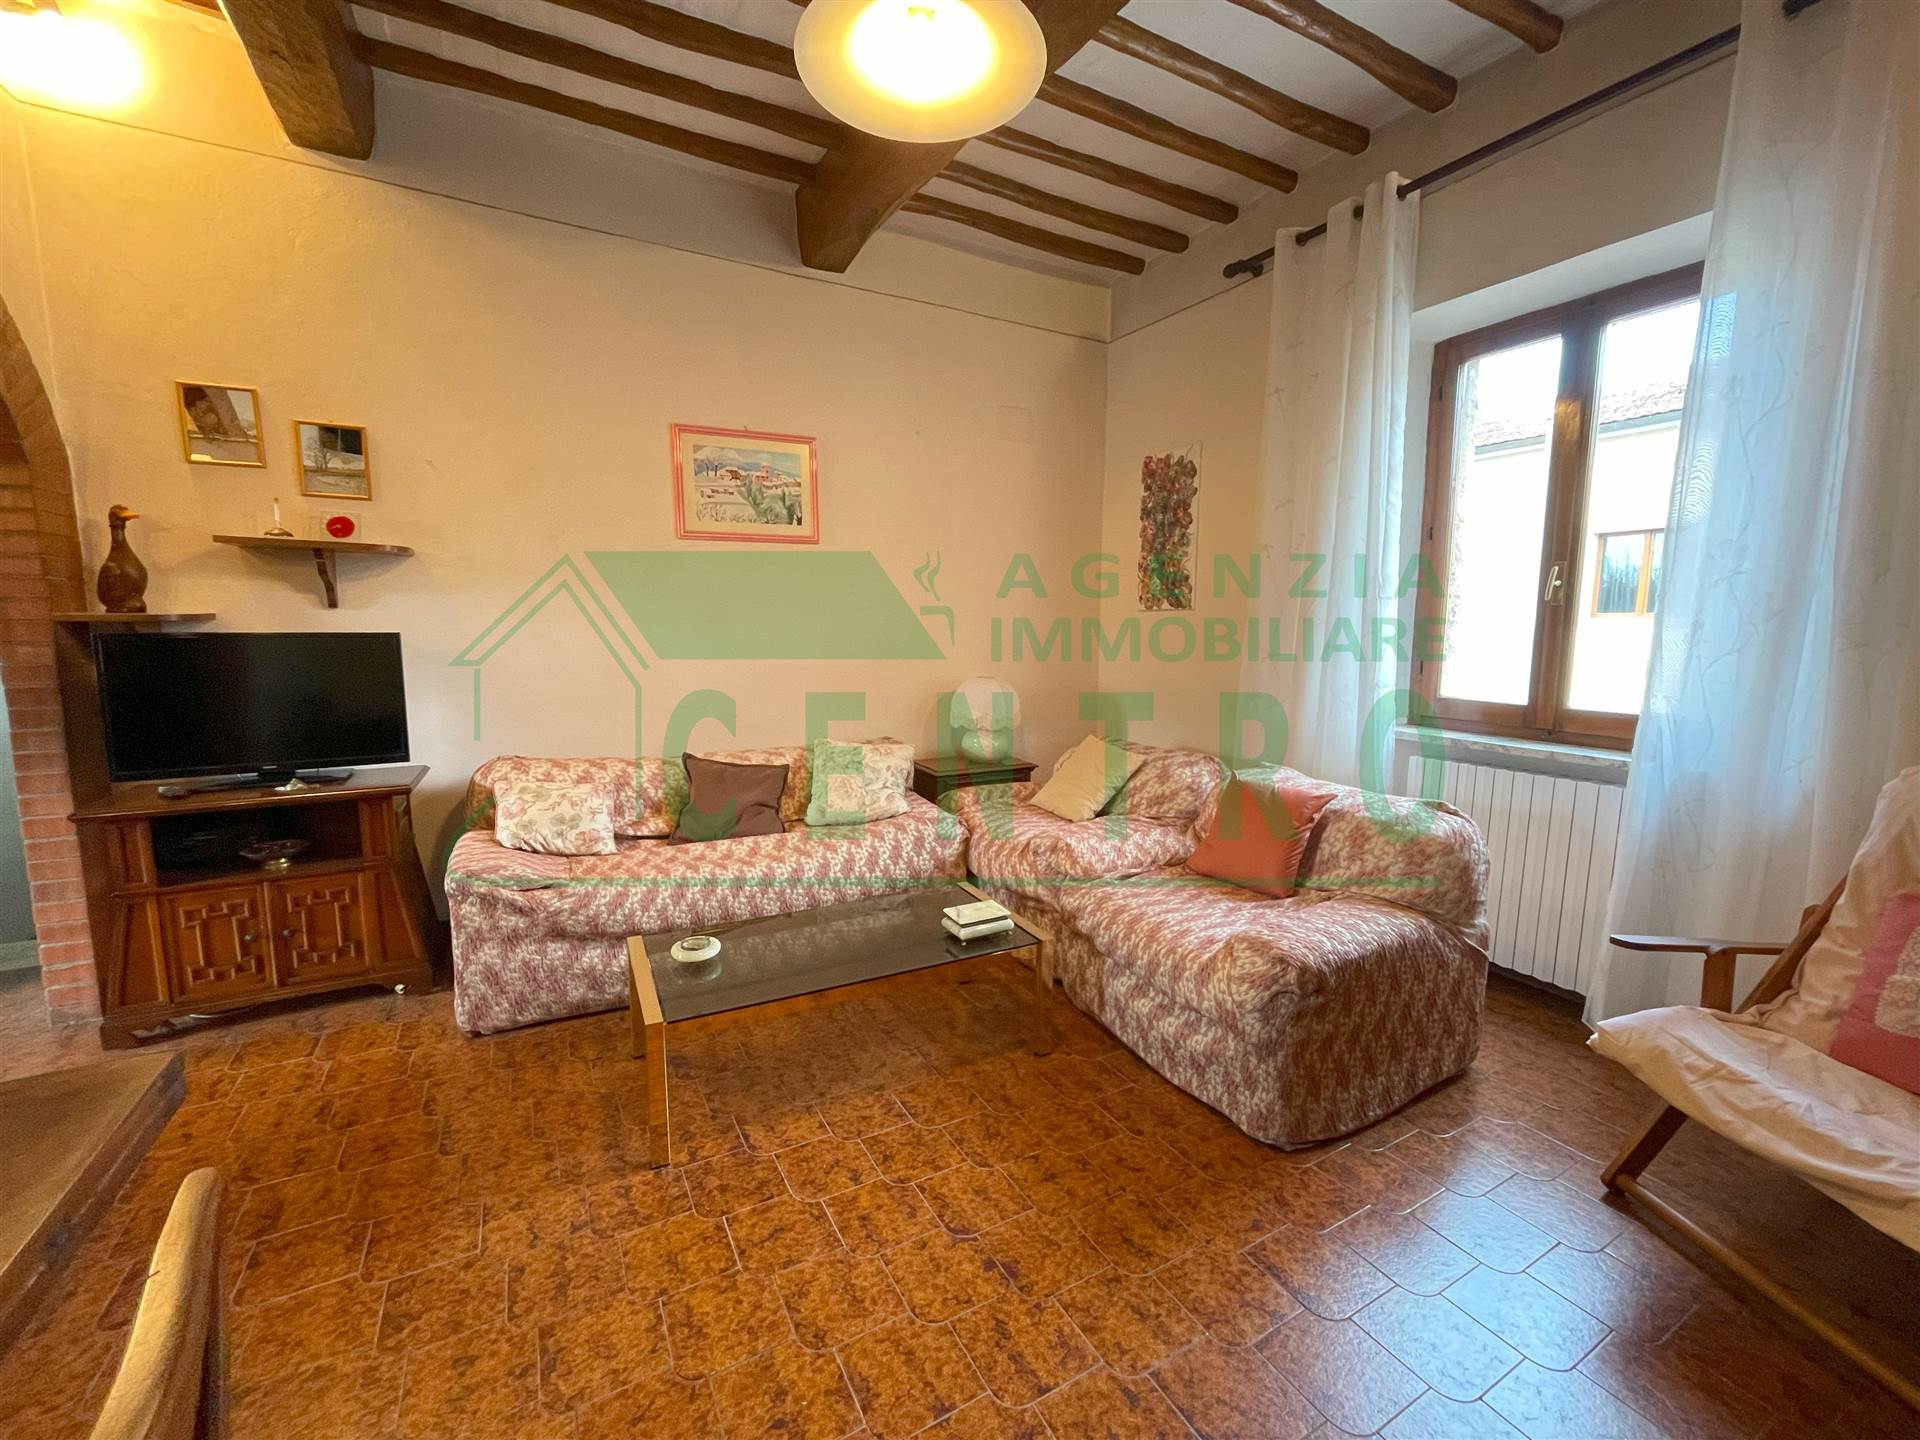 GRACCIANO, COLLE DI VAL D'ELSA, Apartment for sale of 110 Sq. mt., Excellent Condition, Heating Individual heating system, Energetic class: G, placed 